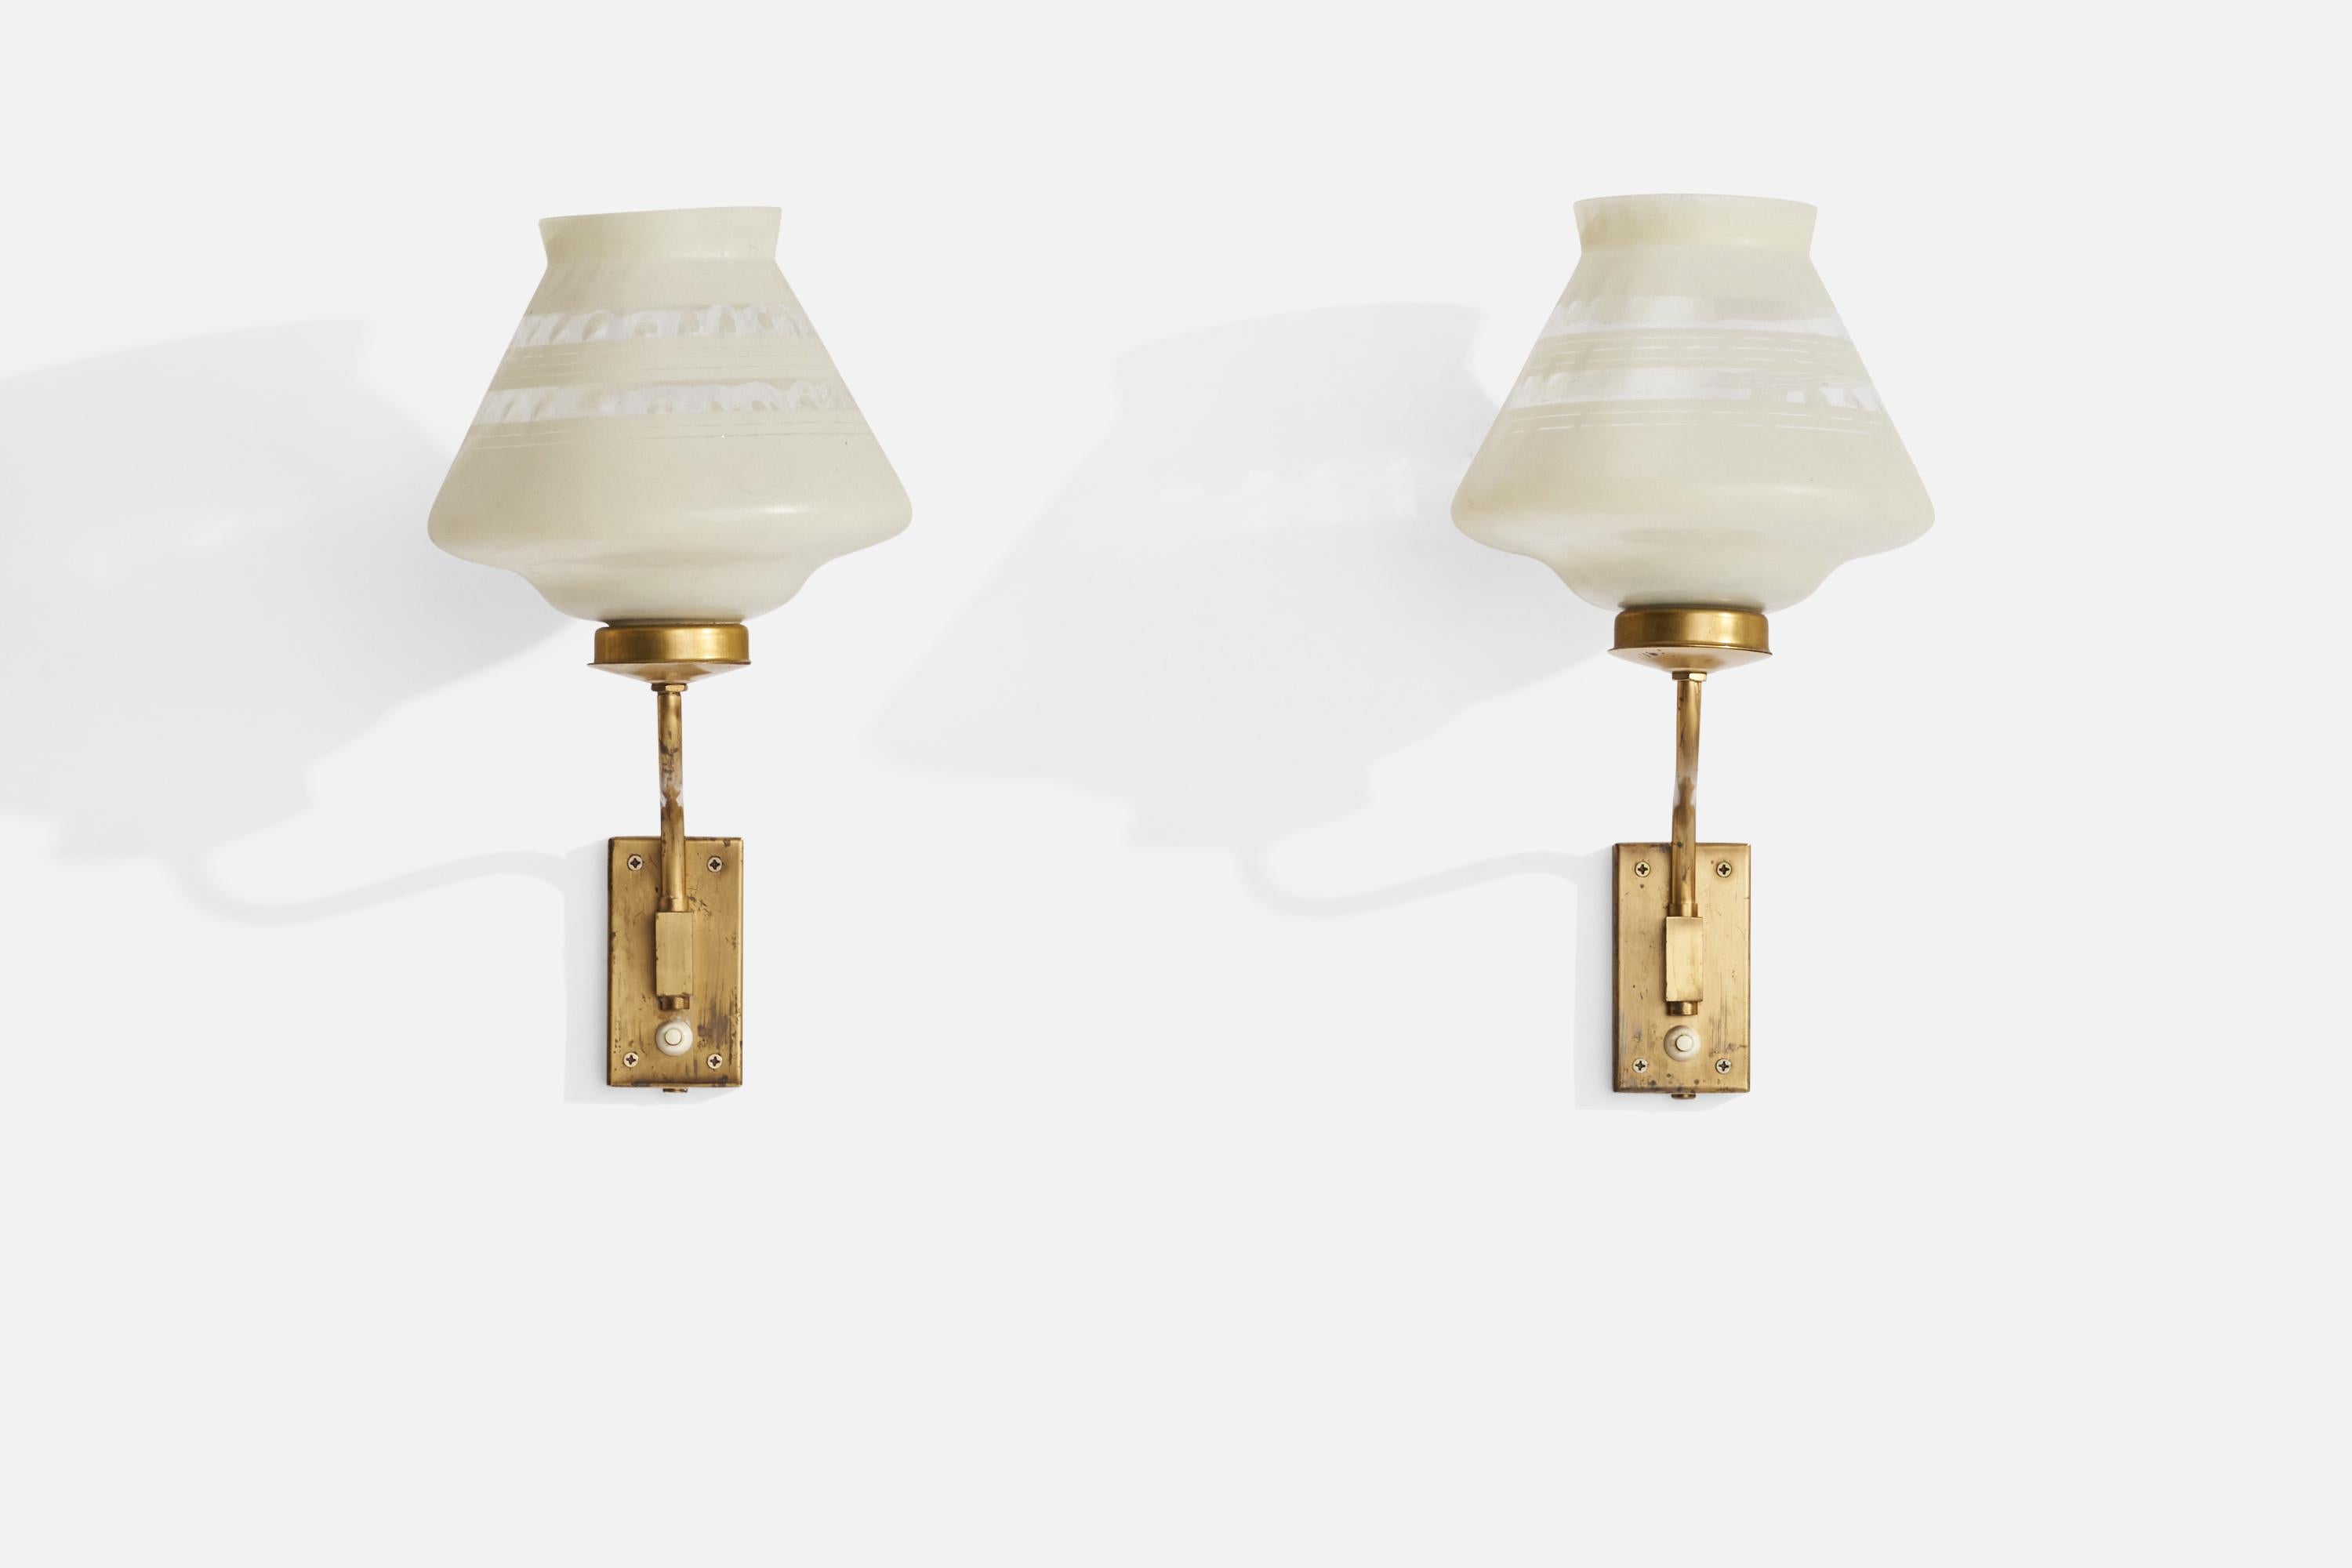 A brass and etched glass wall lights designed and produced in Sweden, 1940s.
Modifications to back-plates with removed brass.
Overall Dimensions (inches): 14” H x 9.5” W x 9.5” D
Back Plate Dimensions (inches): 4” H x 2.25”  W x .75” D
Bulb